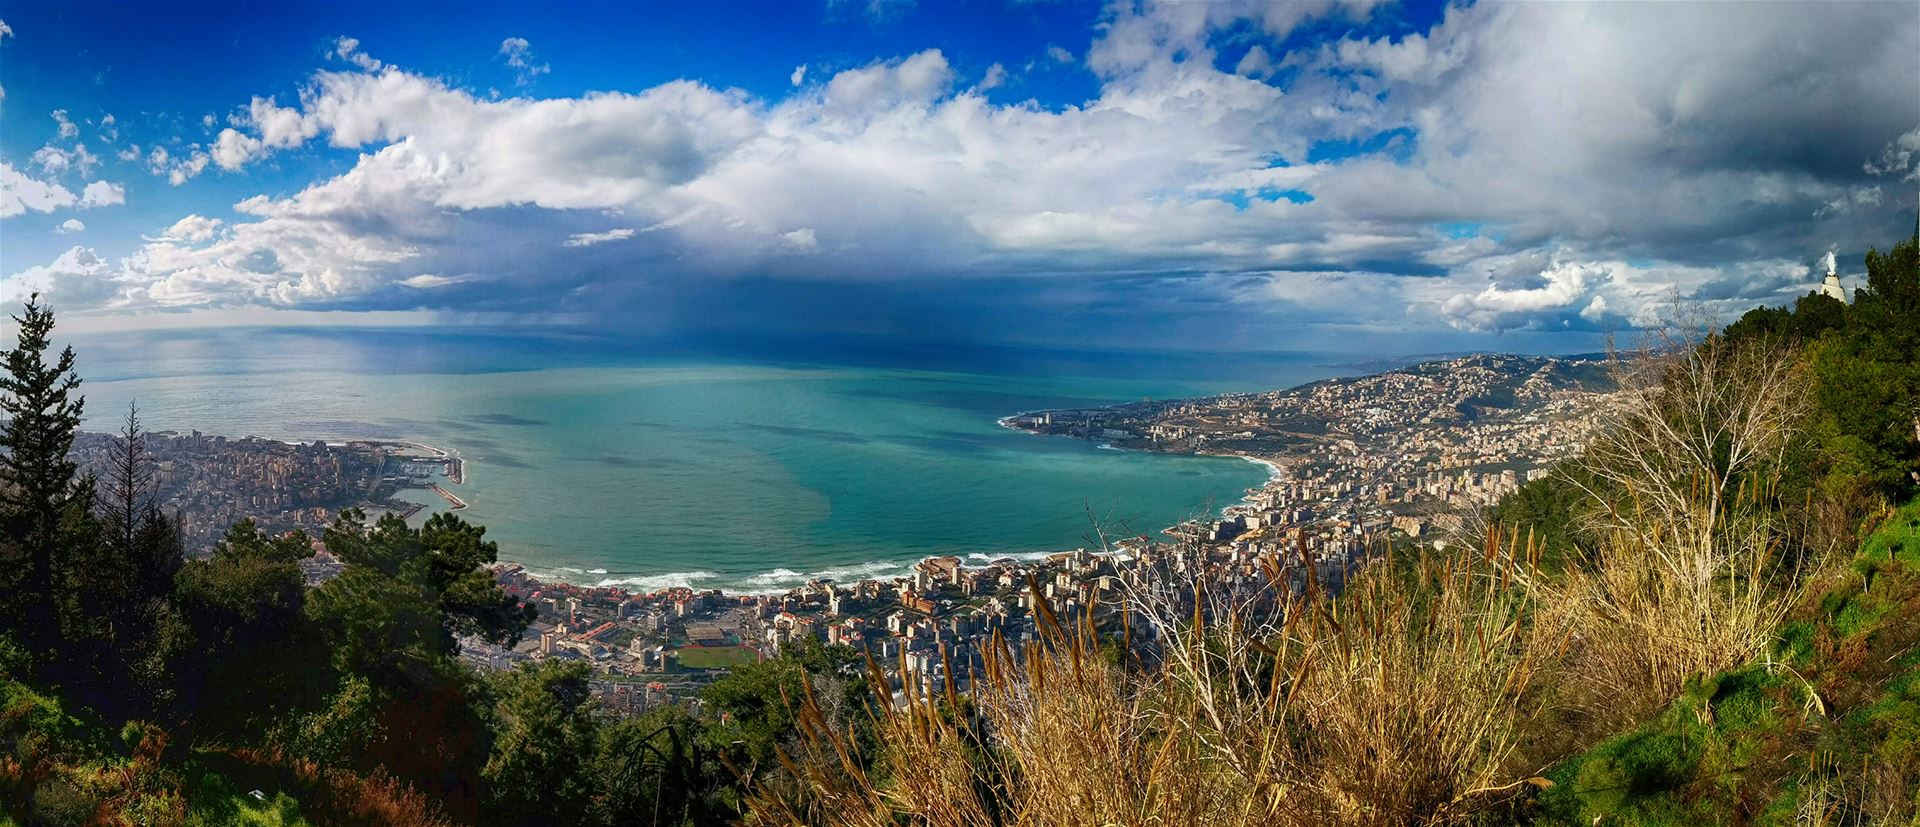 View of Jounieh Bay from Harissa